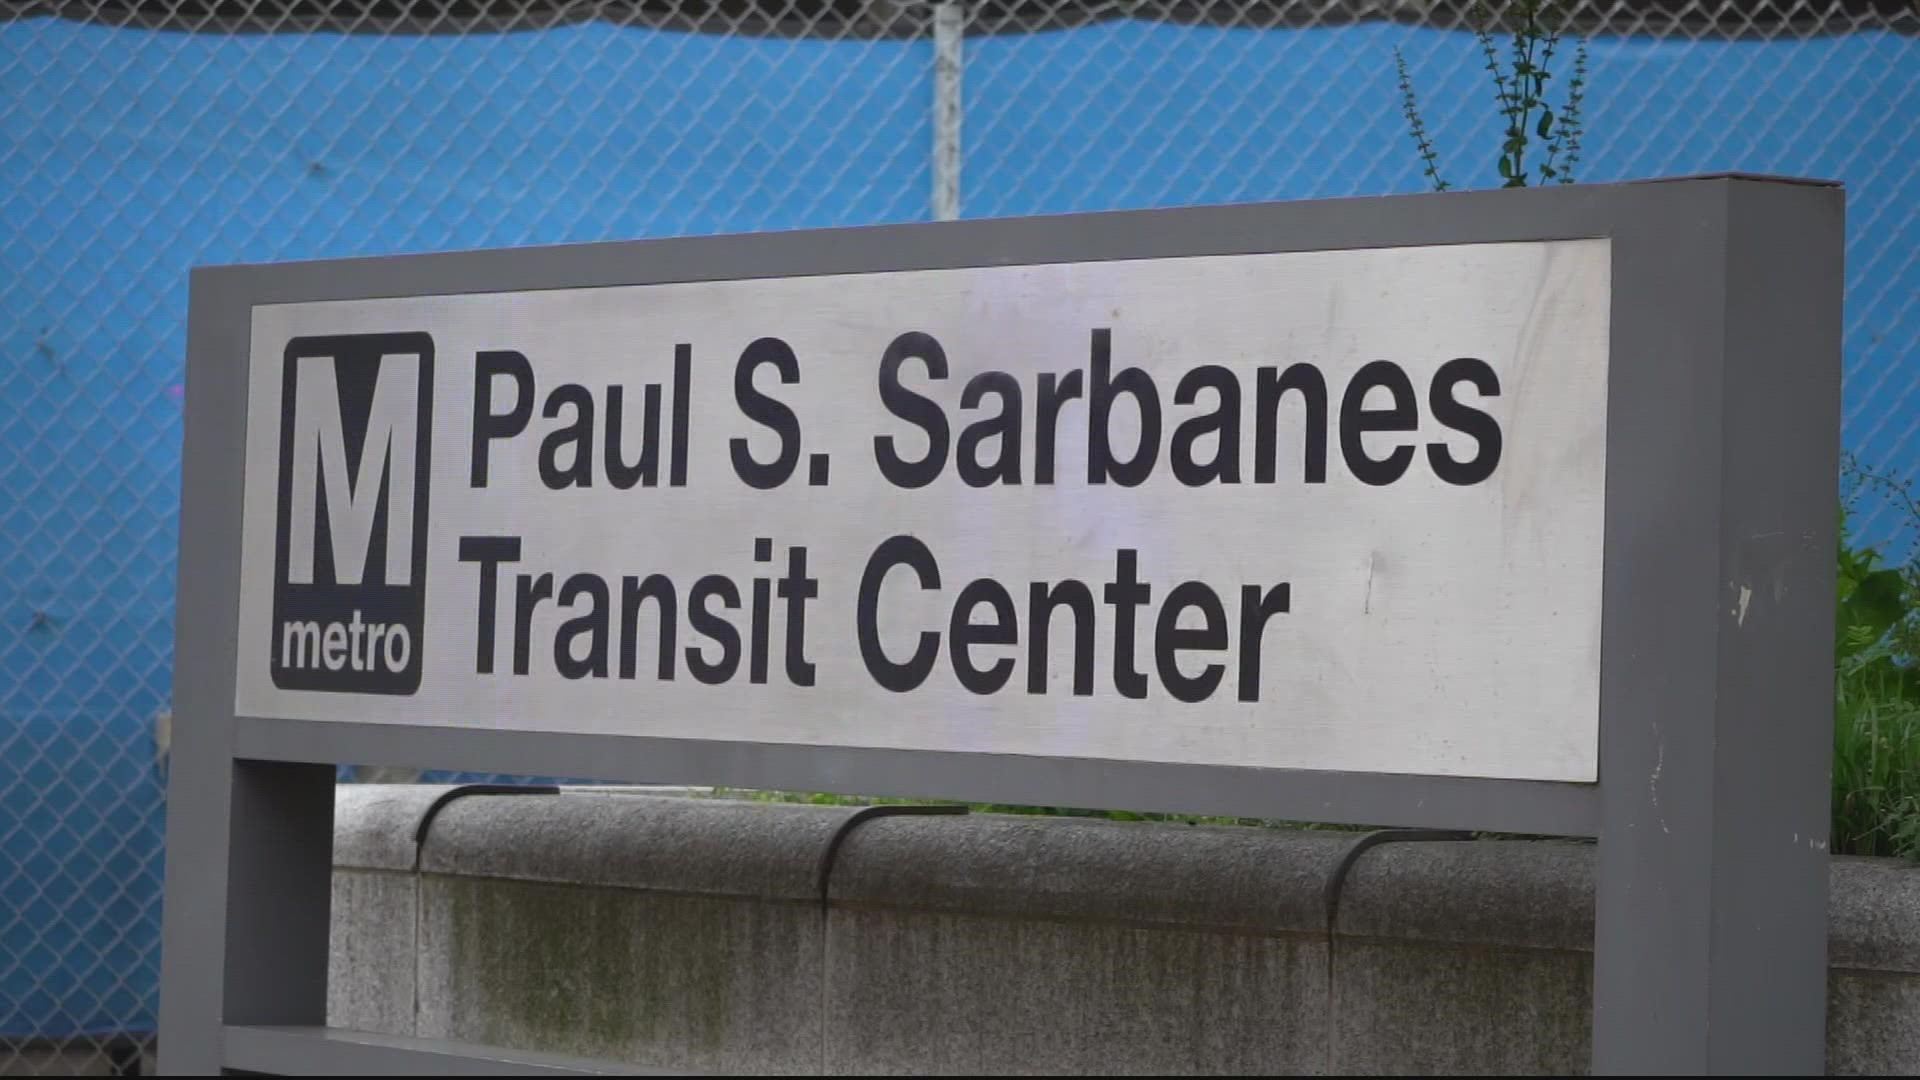 Metro Transit Police are working to identify and locate the person who shot a man Saturday morning at the Paul S. Sarbanes Transit Center in Montgomery County.